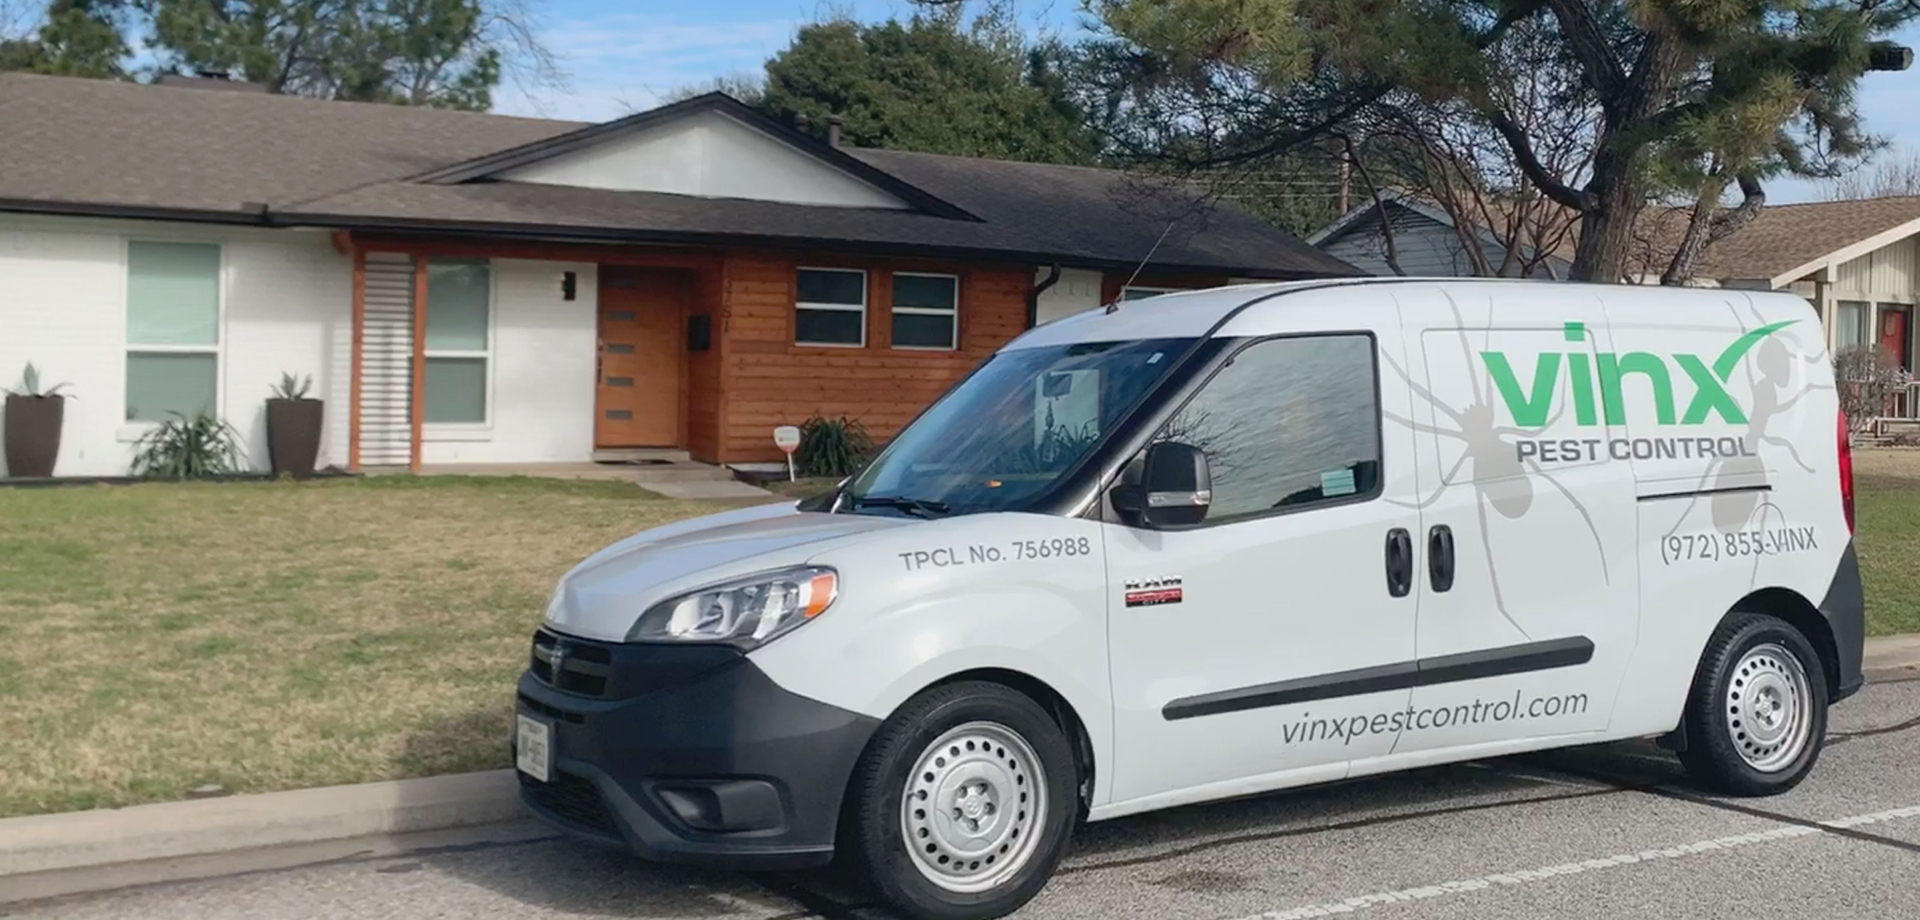 The BEST Pest Control in Dallas, Texas